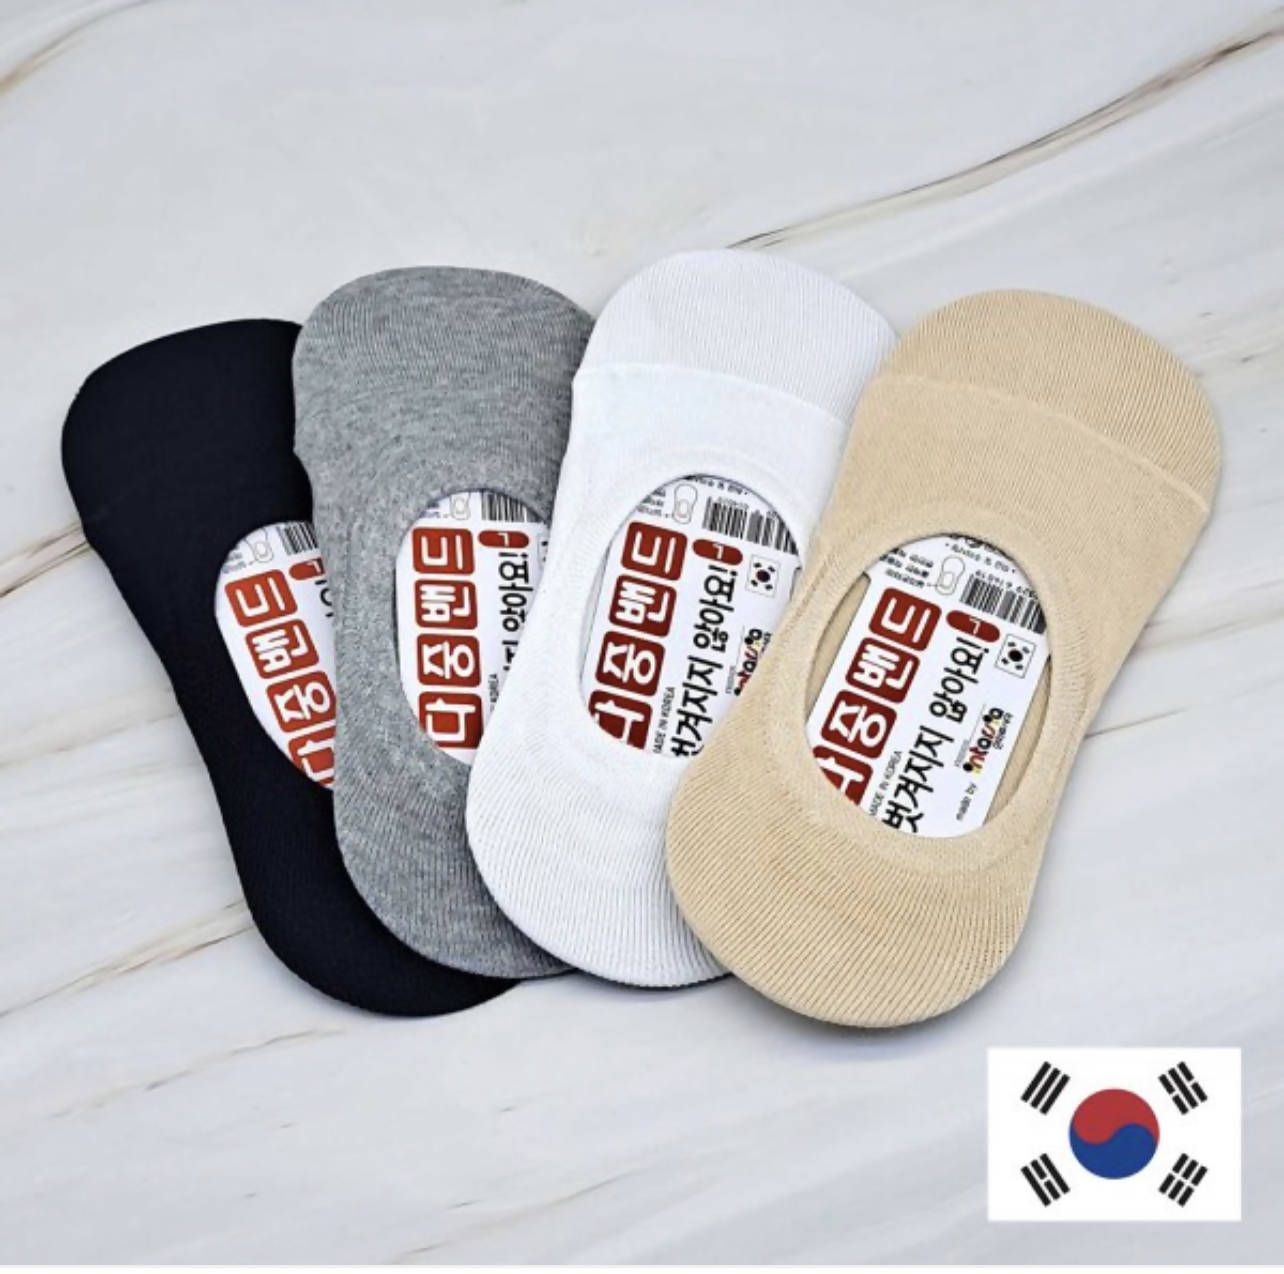 5 Pairs, Invisible Socks, No Show Socks, 4 Colors, Made in Korea